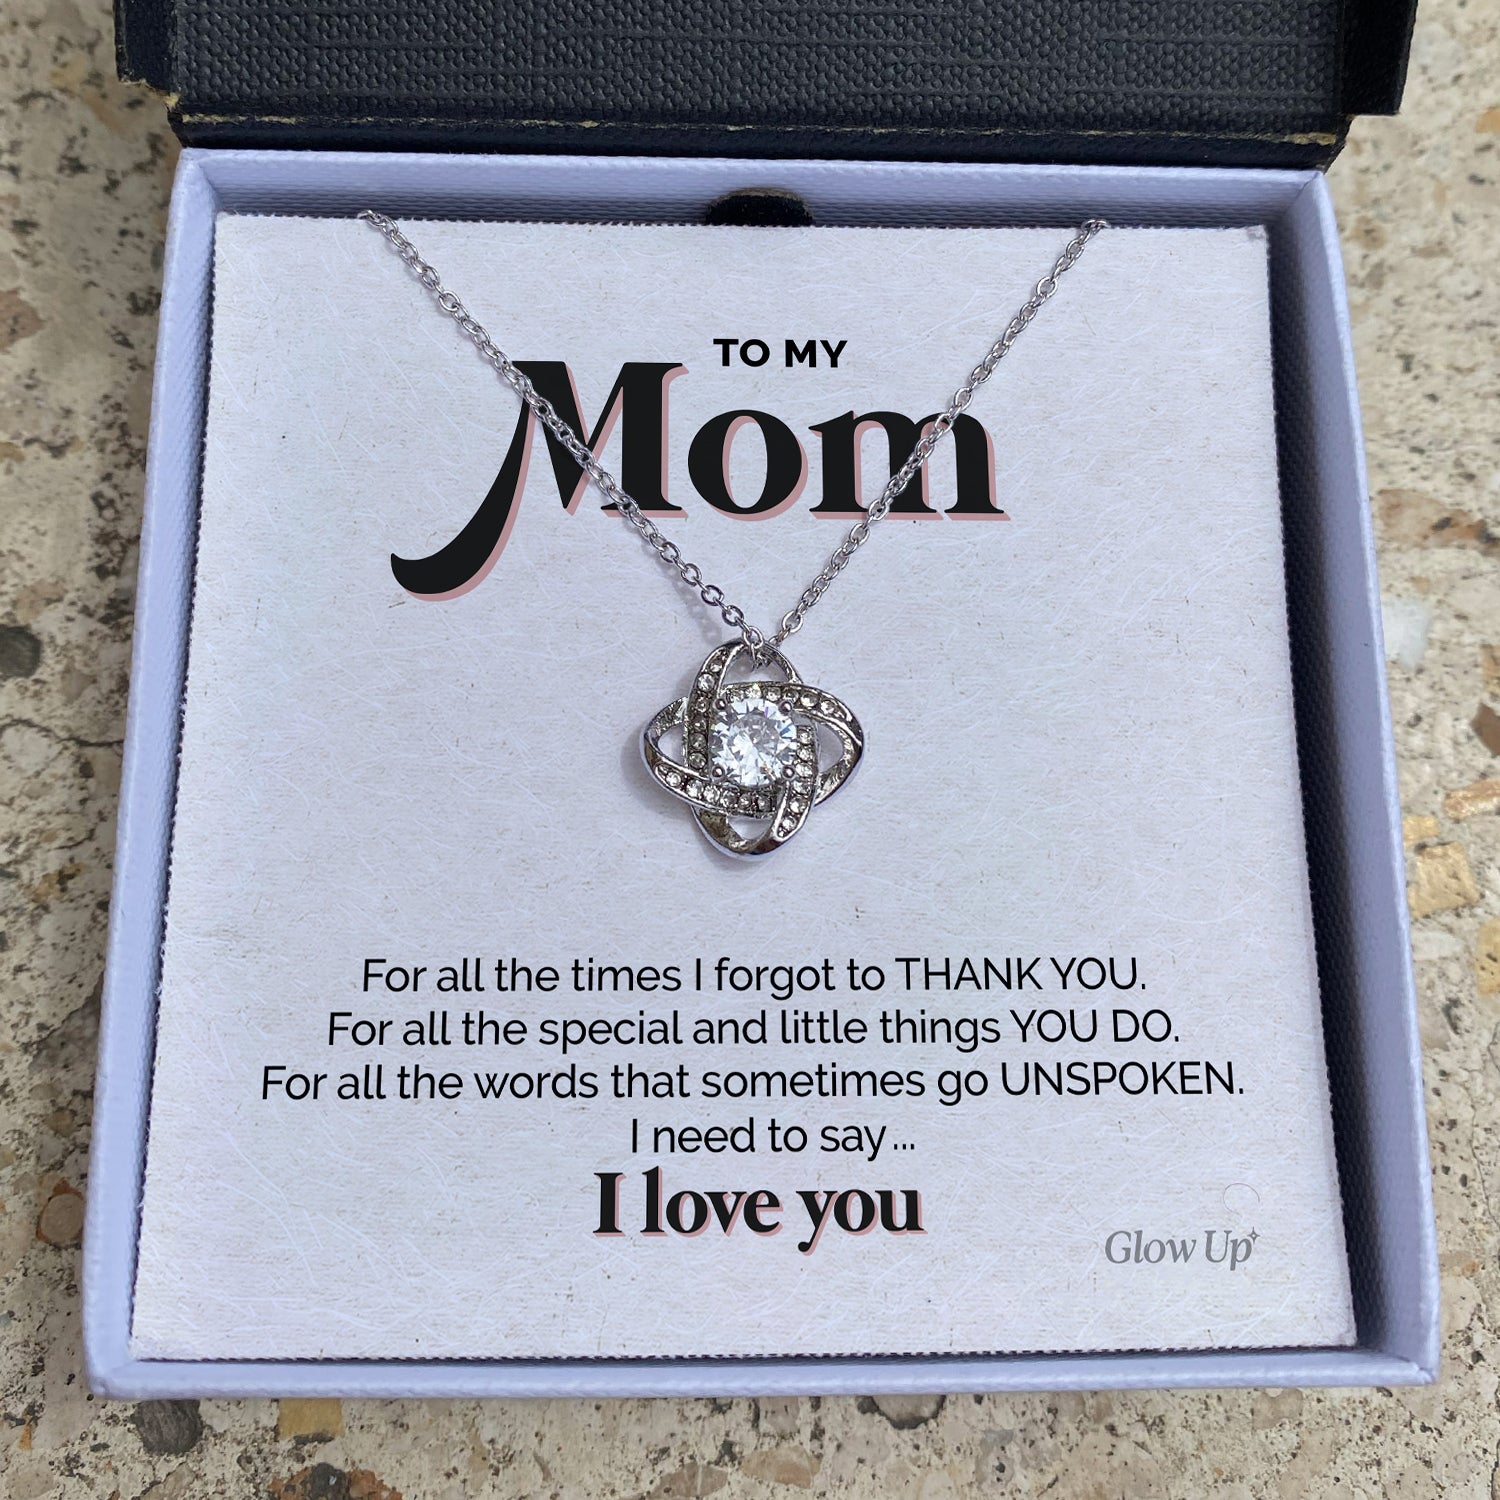 ShineOn Fulfillment Jewelry Two Toned Box To My Mom - Thank You - Loveknot necklace